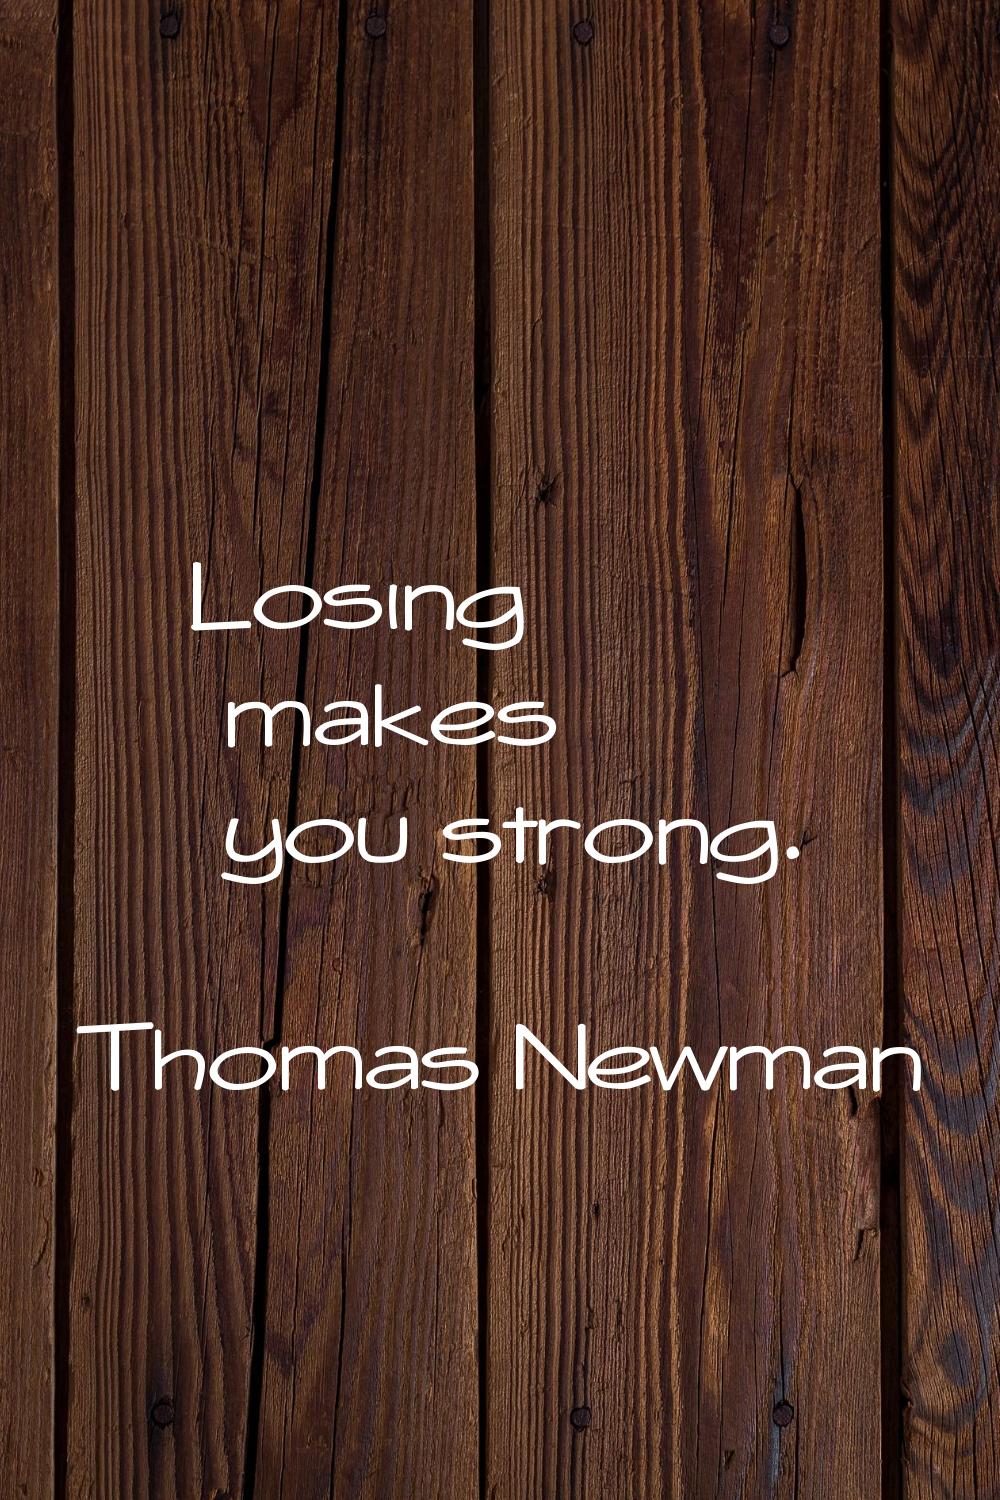 Losing makes you strong.